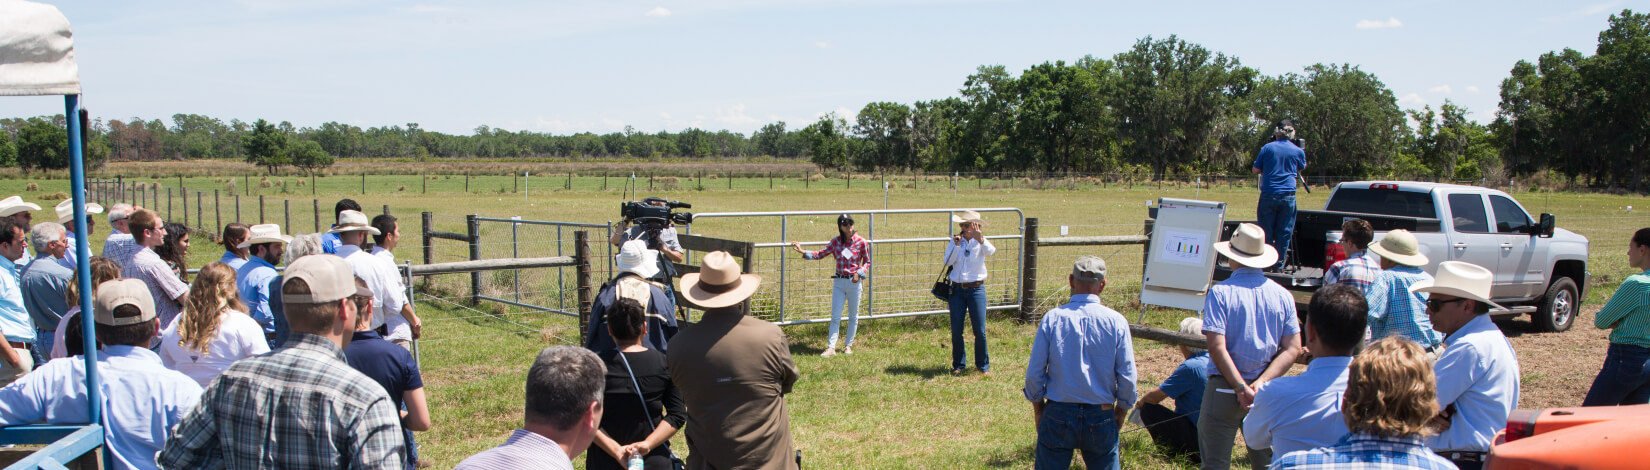 Attendees listening to a speaker at a field day at the Range Cattle REC